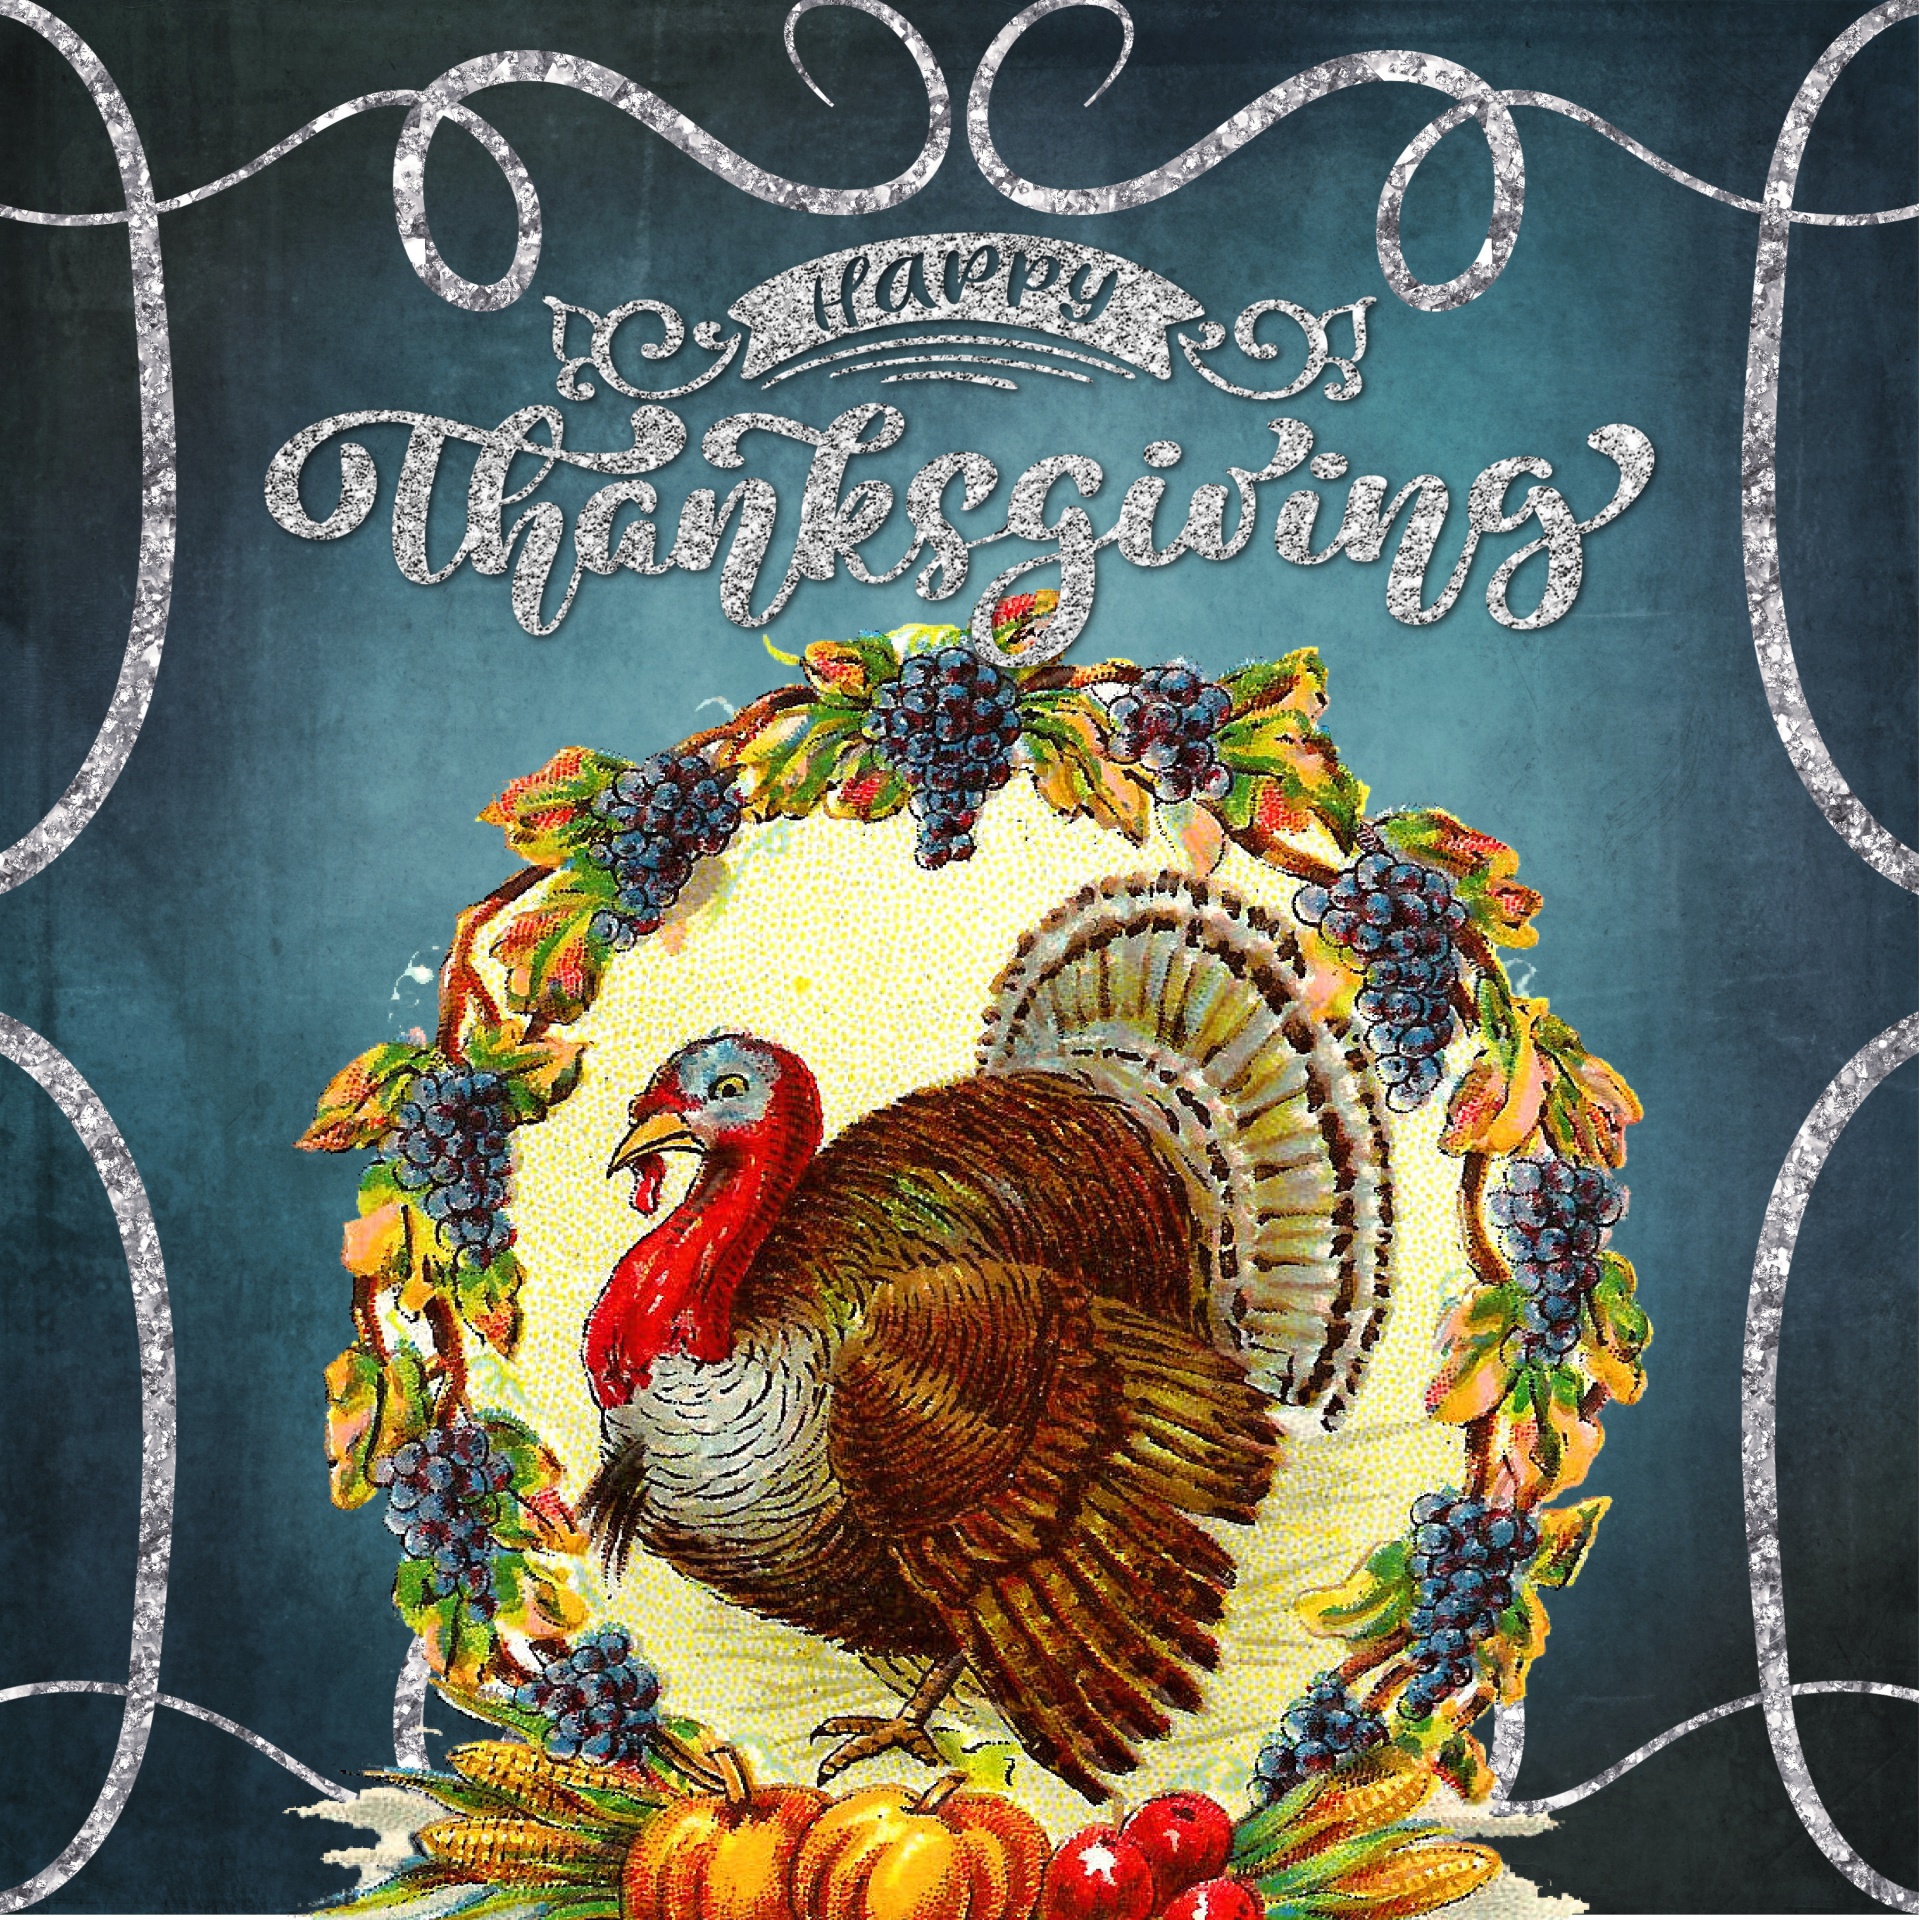 vintage illustration of a turkey framed within a grape wreath on blue antique background design and HAPPY THANKSGIVING words